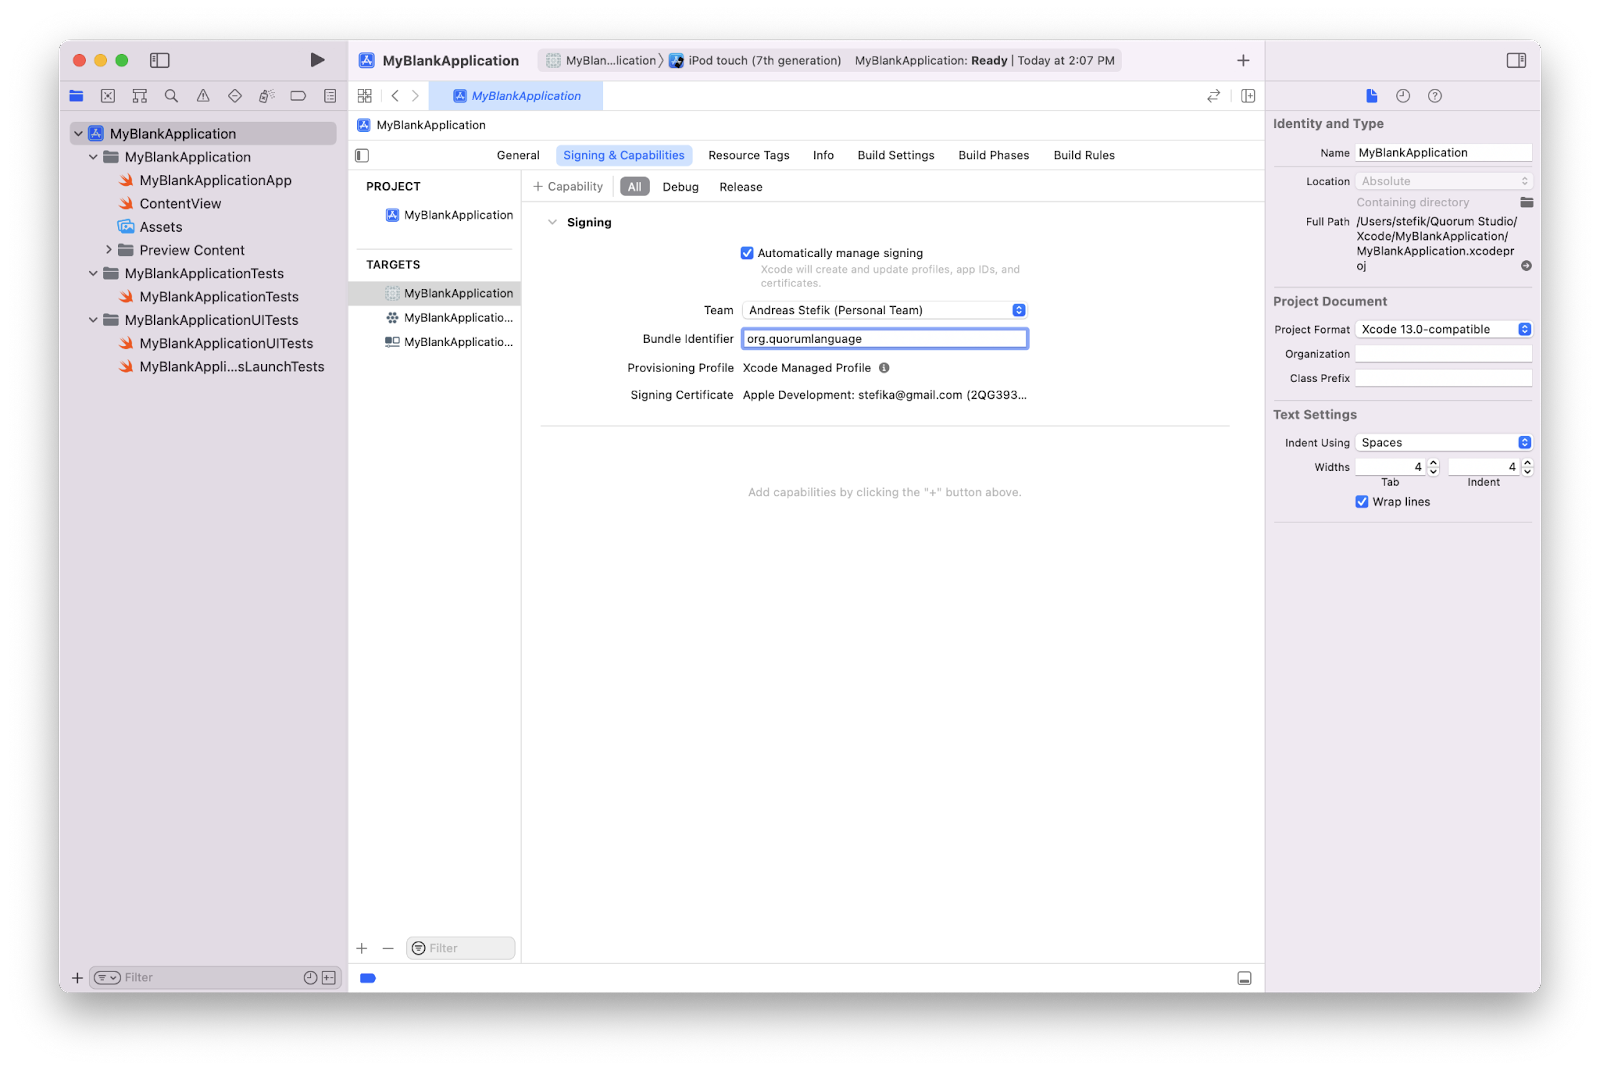 The Xcode Project open to the signing and capabilites section. and the Bundle Identifier field is selected and org.quourmlanguage is in the field.